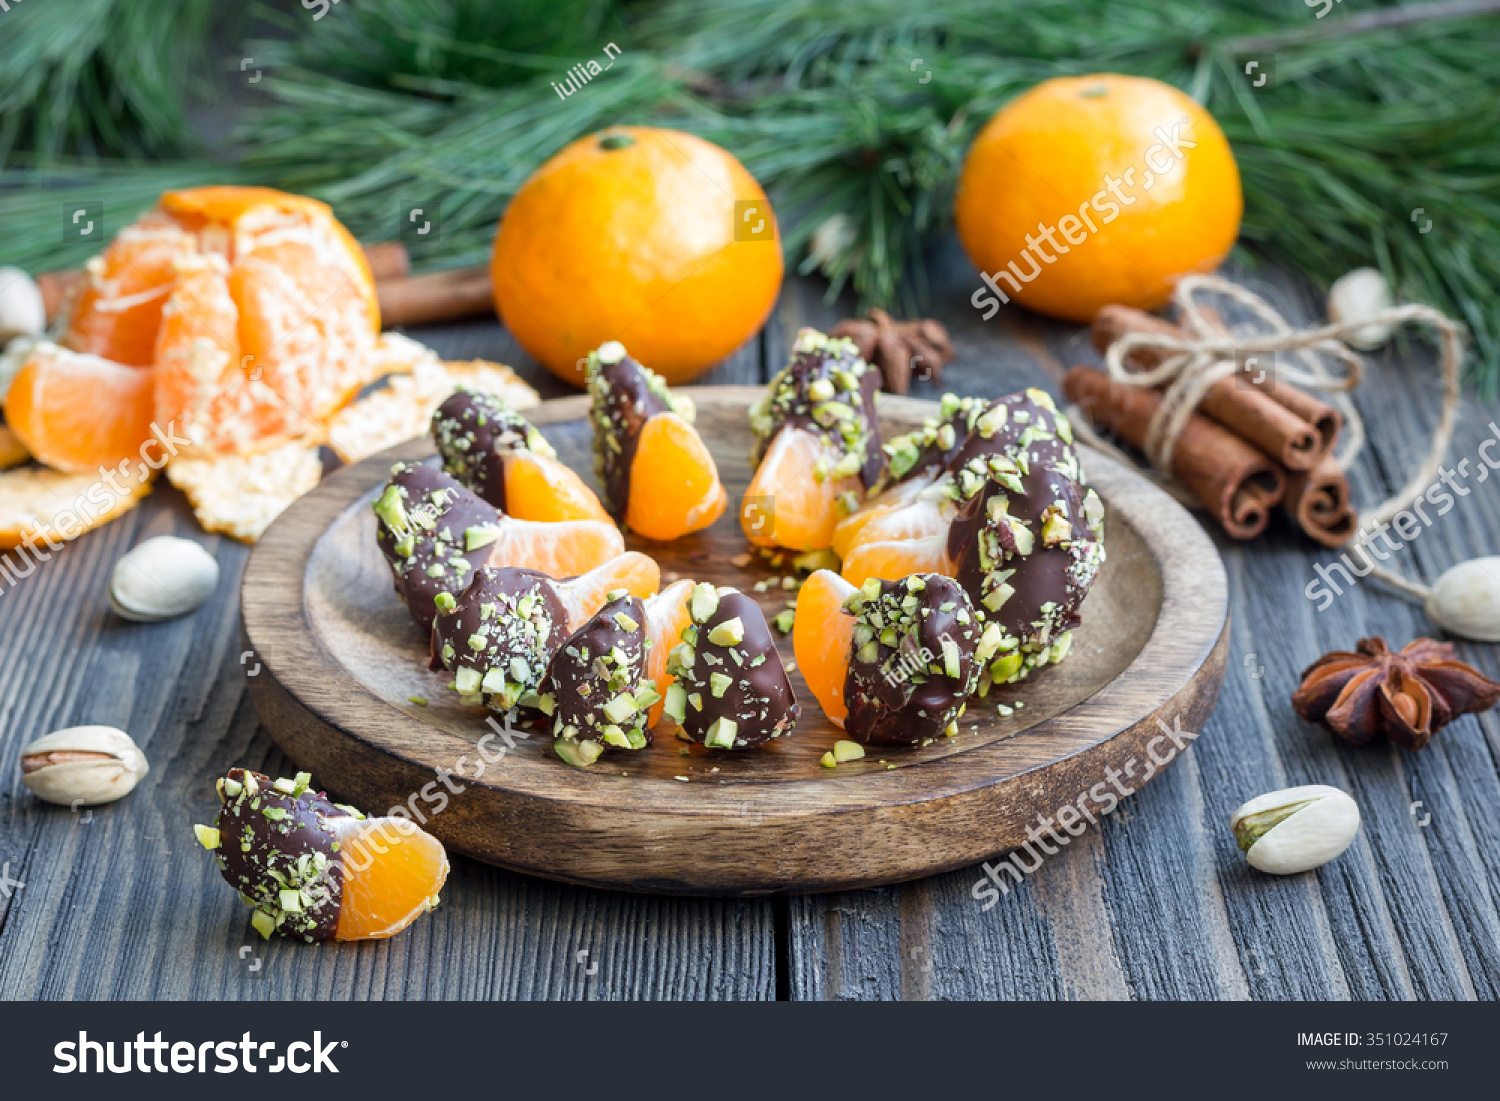 Mandarins covered with chocolate and pistachio #351024167